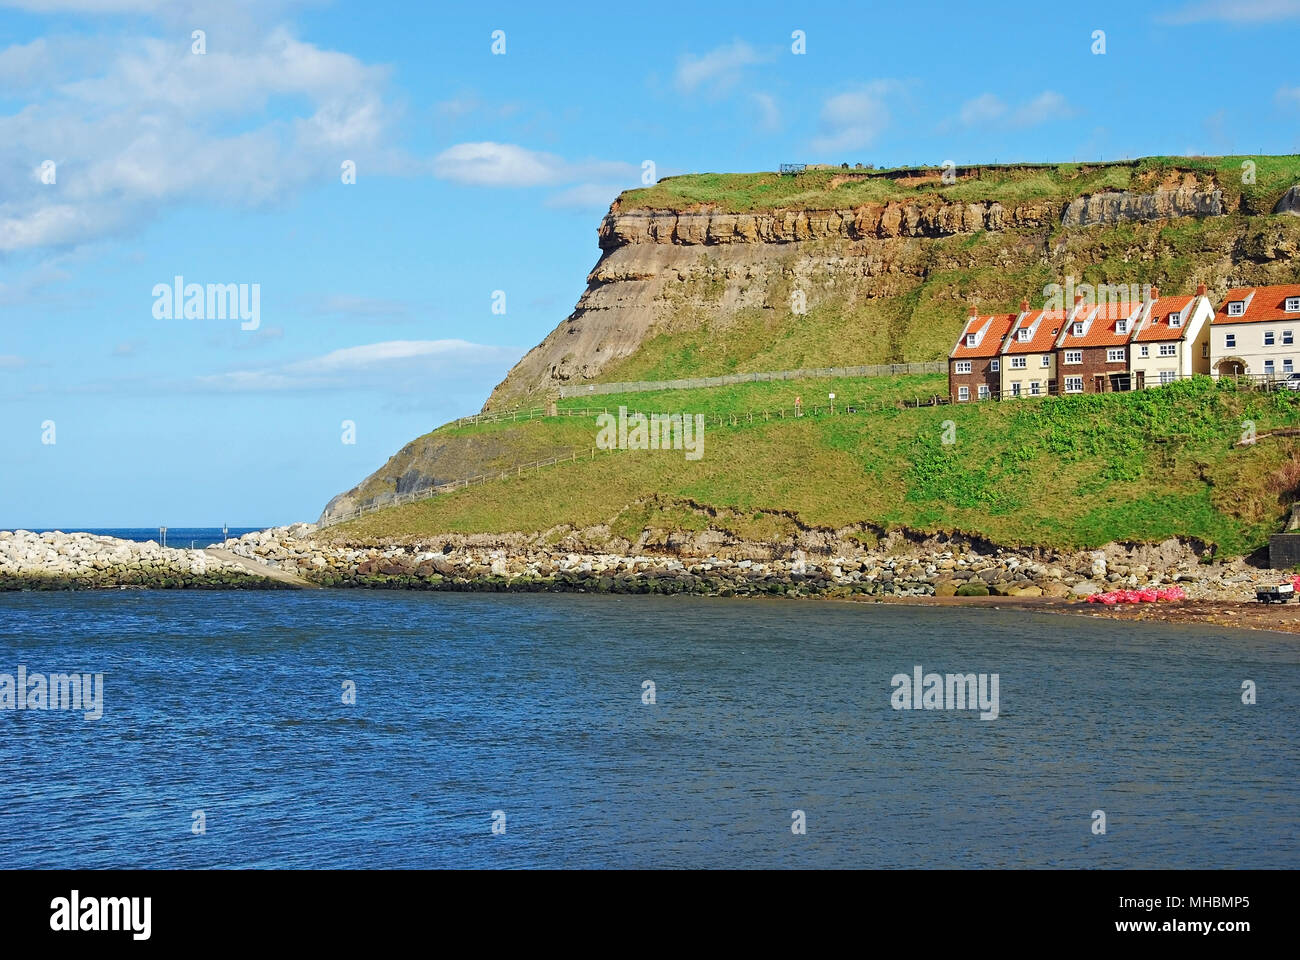 A grassy headland seen under a blue sky across the River Esk from Whitby town, with a row of red roofed houses situated on the headland Stock Photo